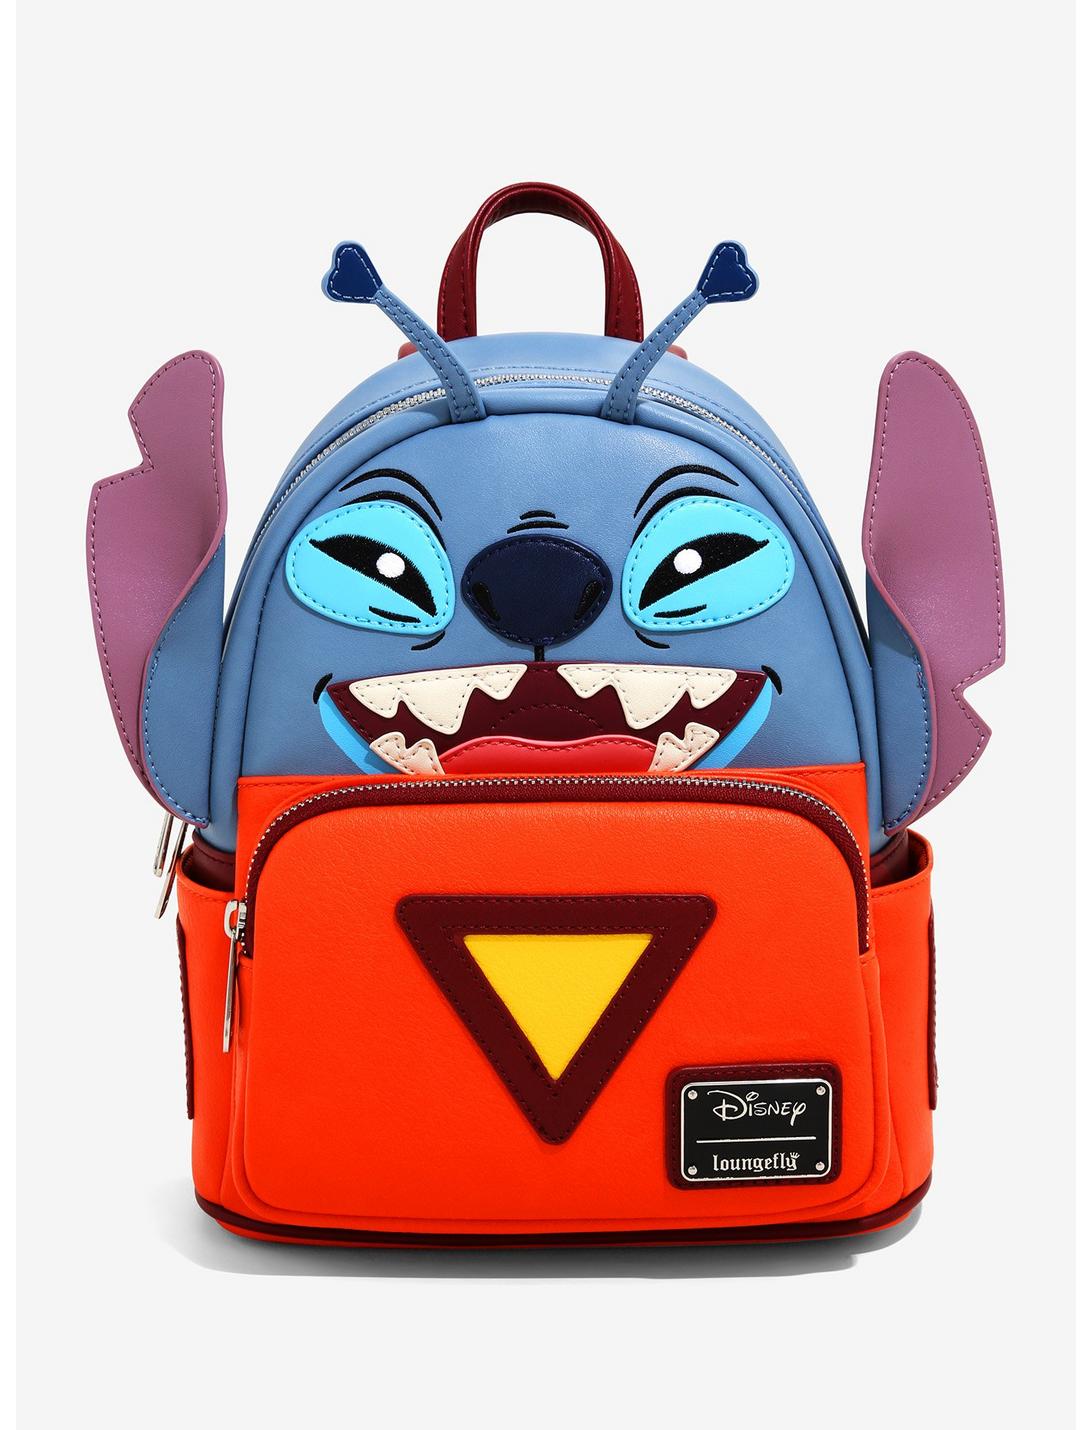 Loungefly Disney Lilo & Stitch 626 Spacesuit Figural Mini Backpack, , hi-res